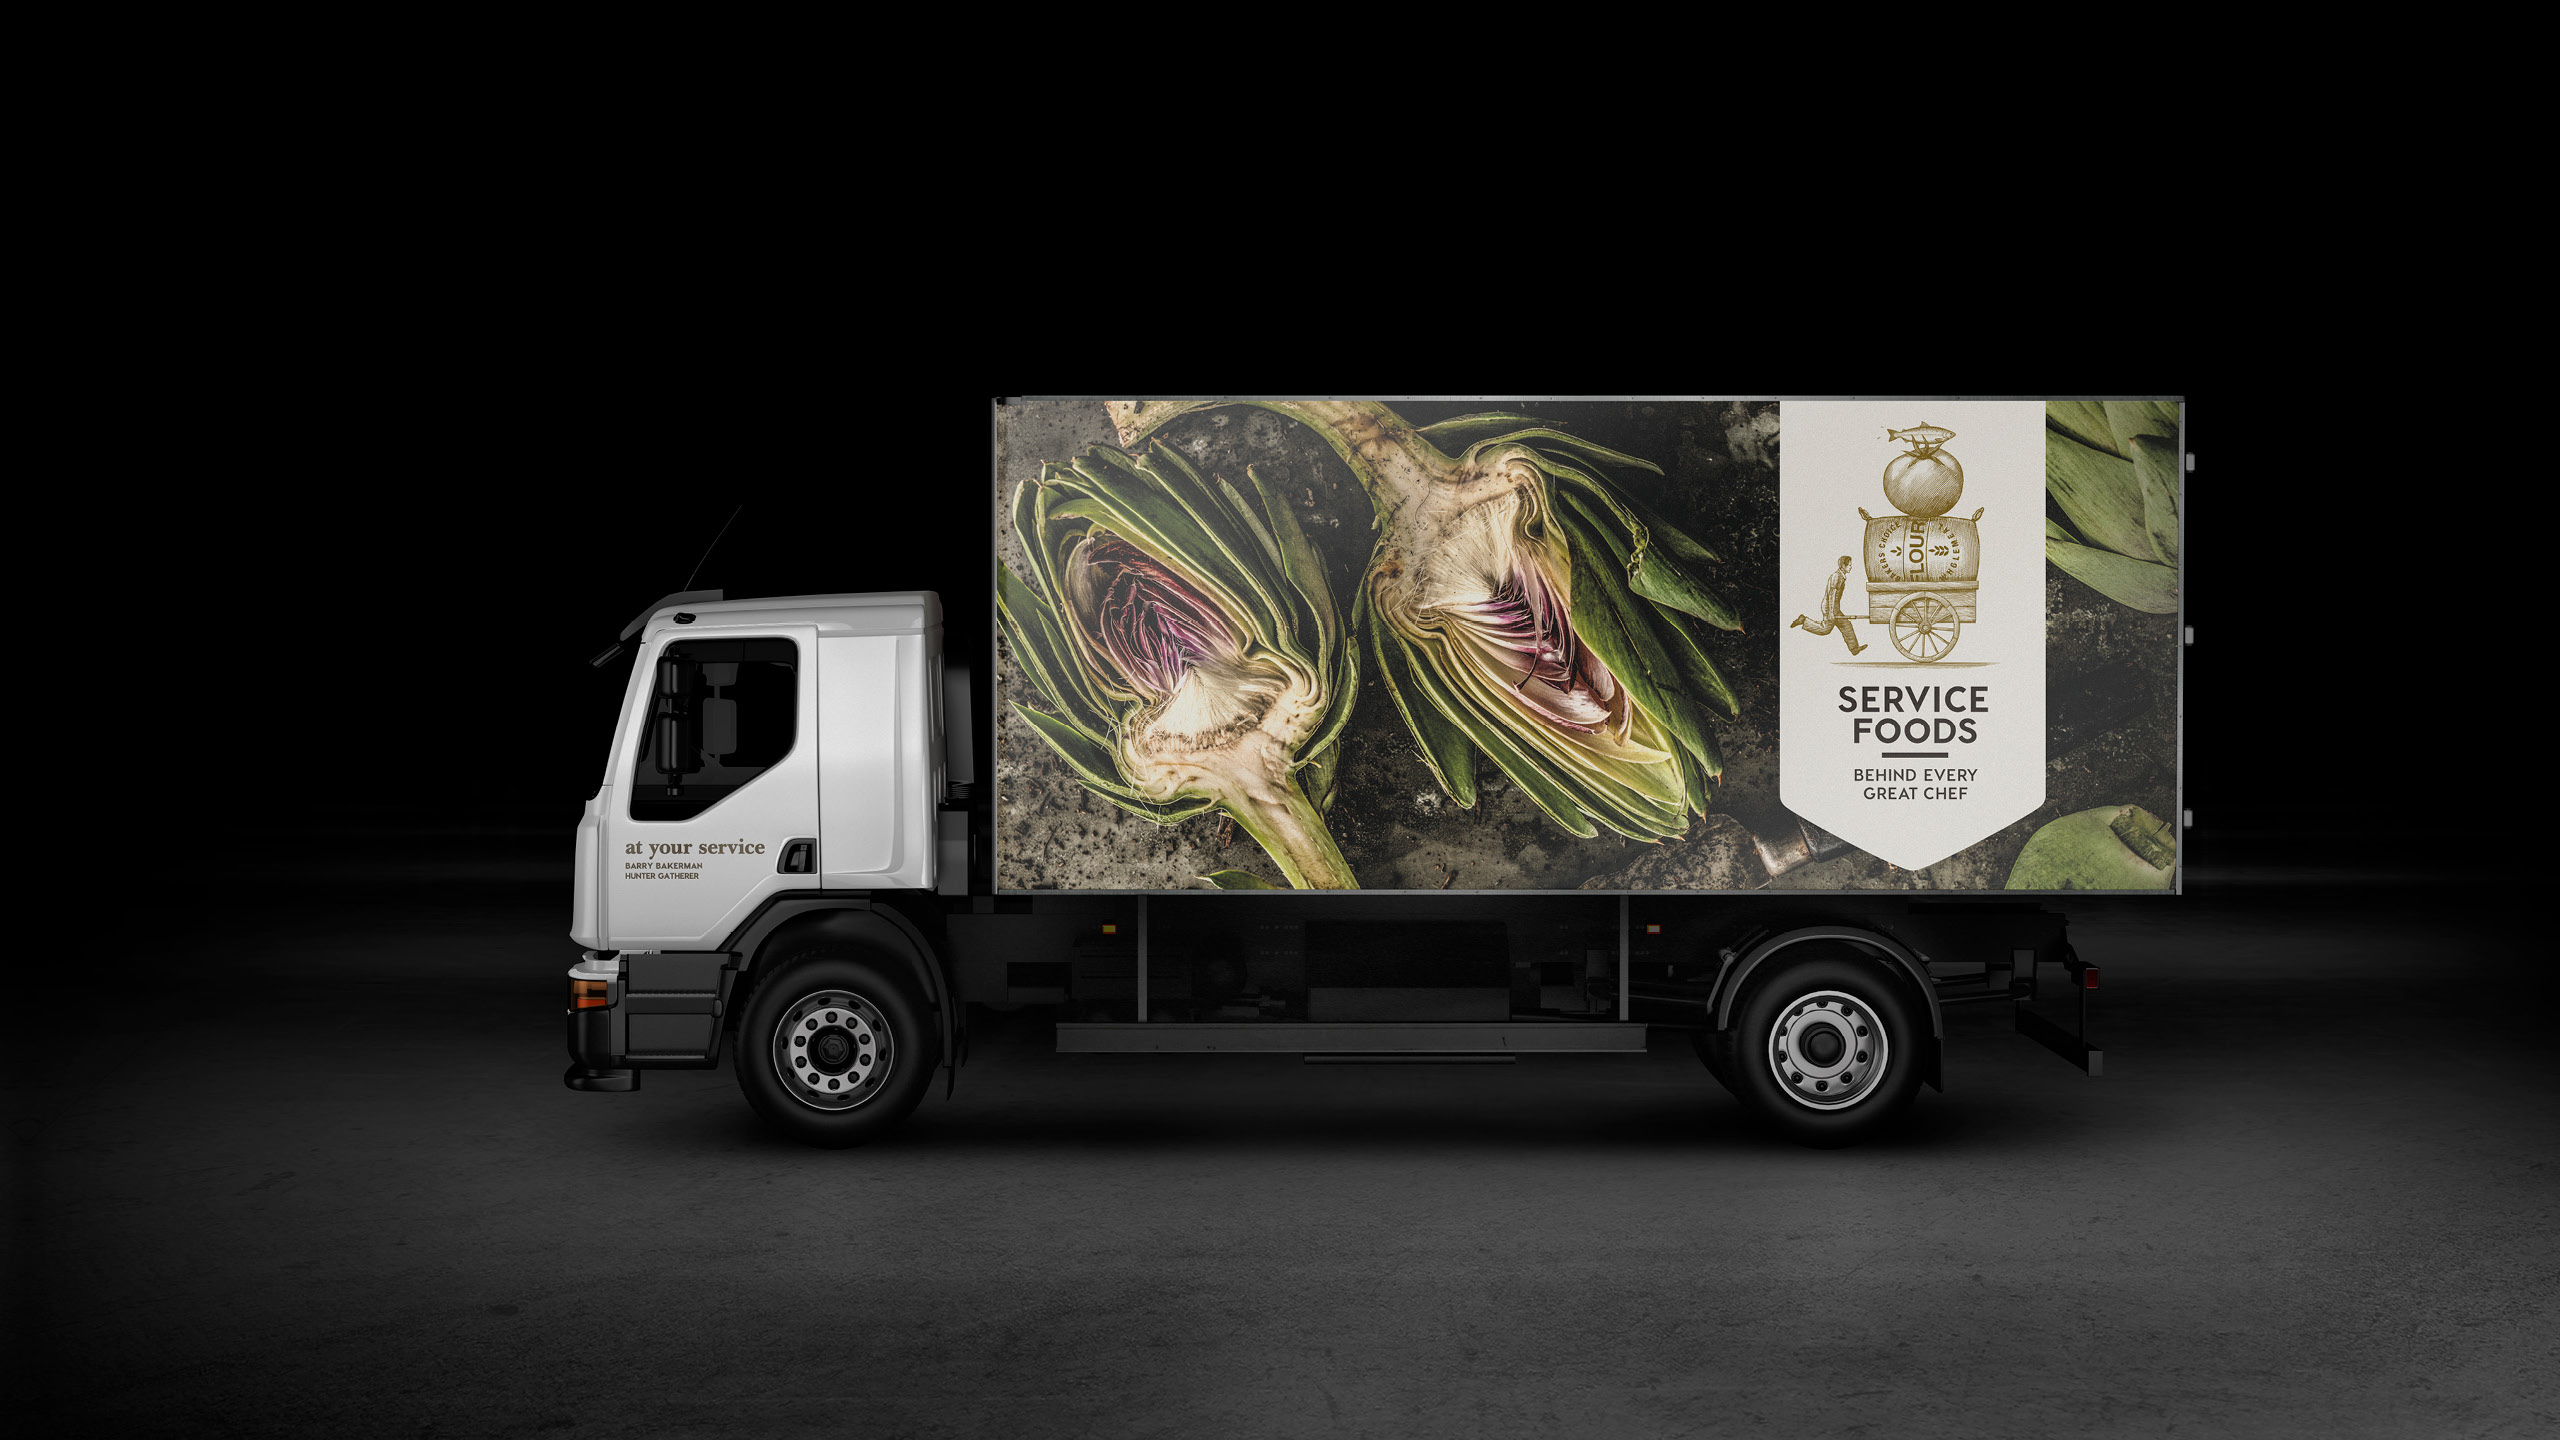 Tried-and-True-Design-Auckland-Service-Foods-Truck4